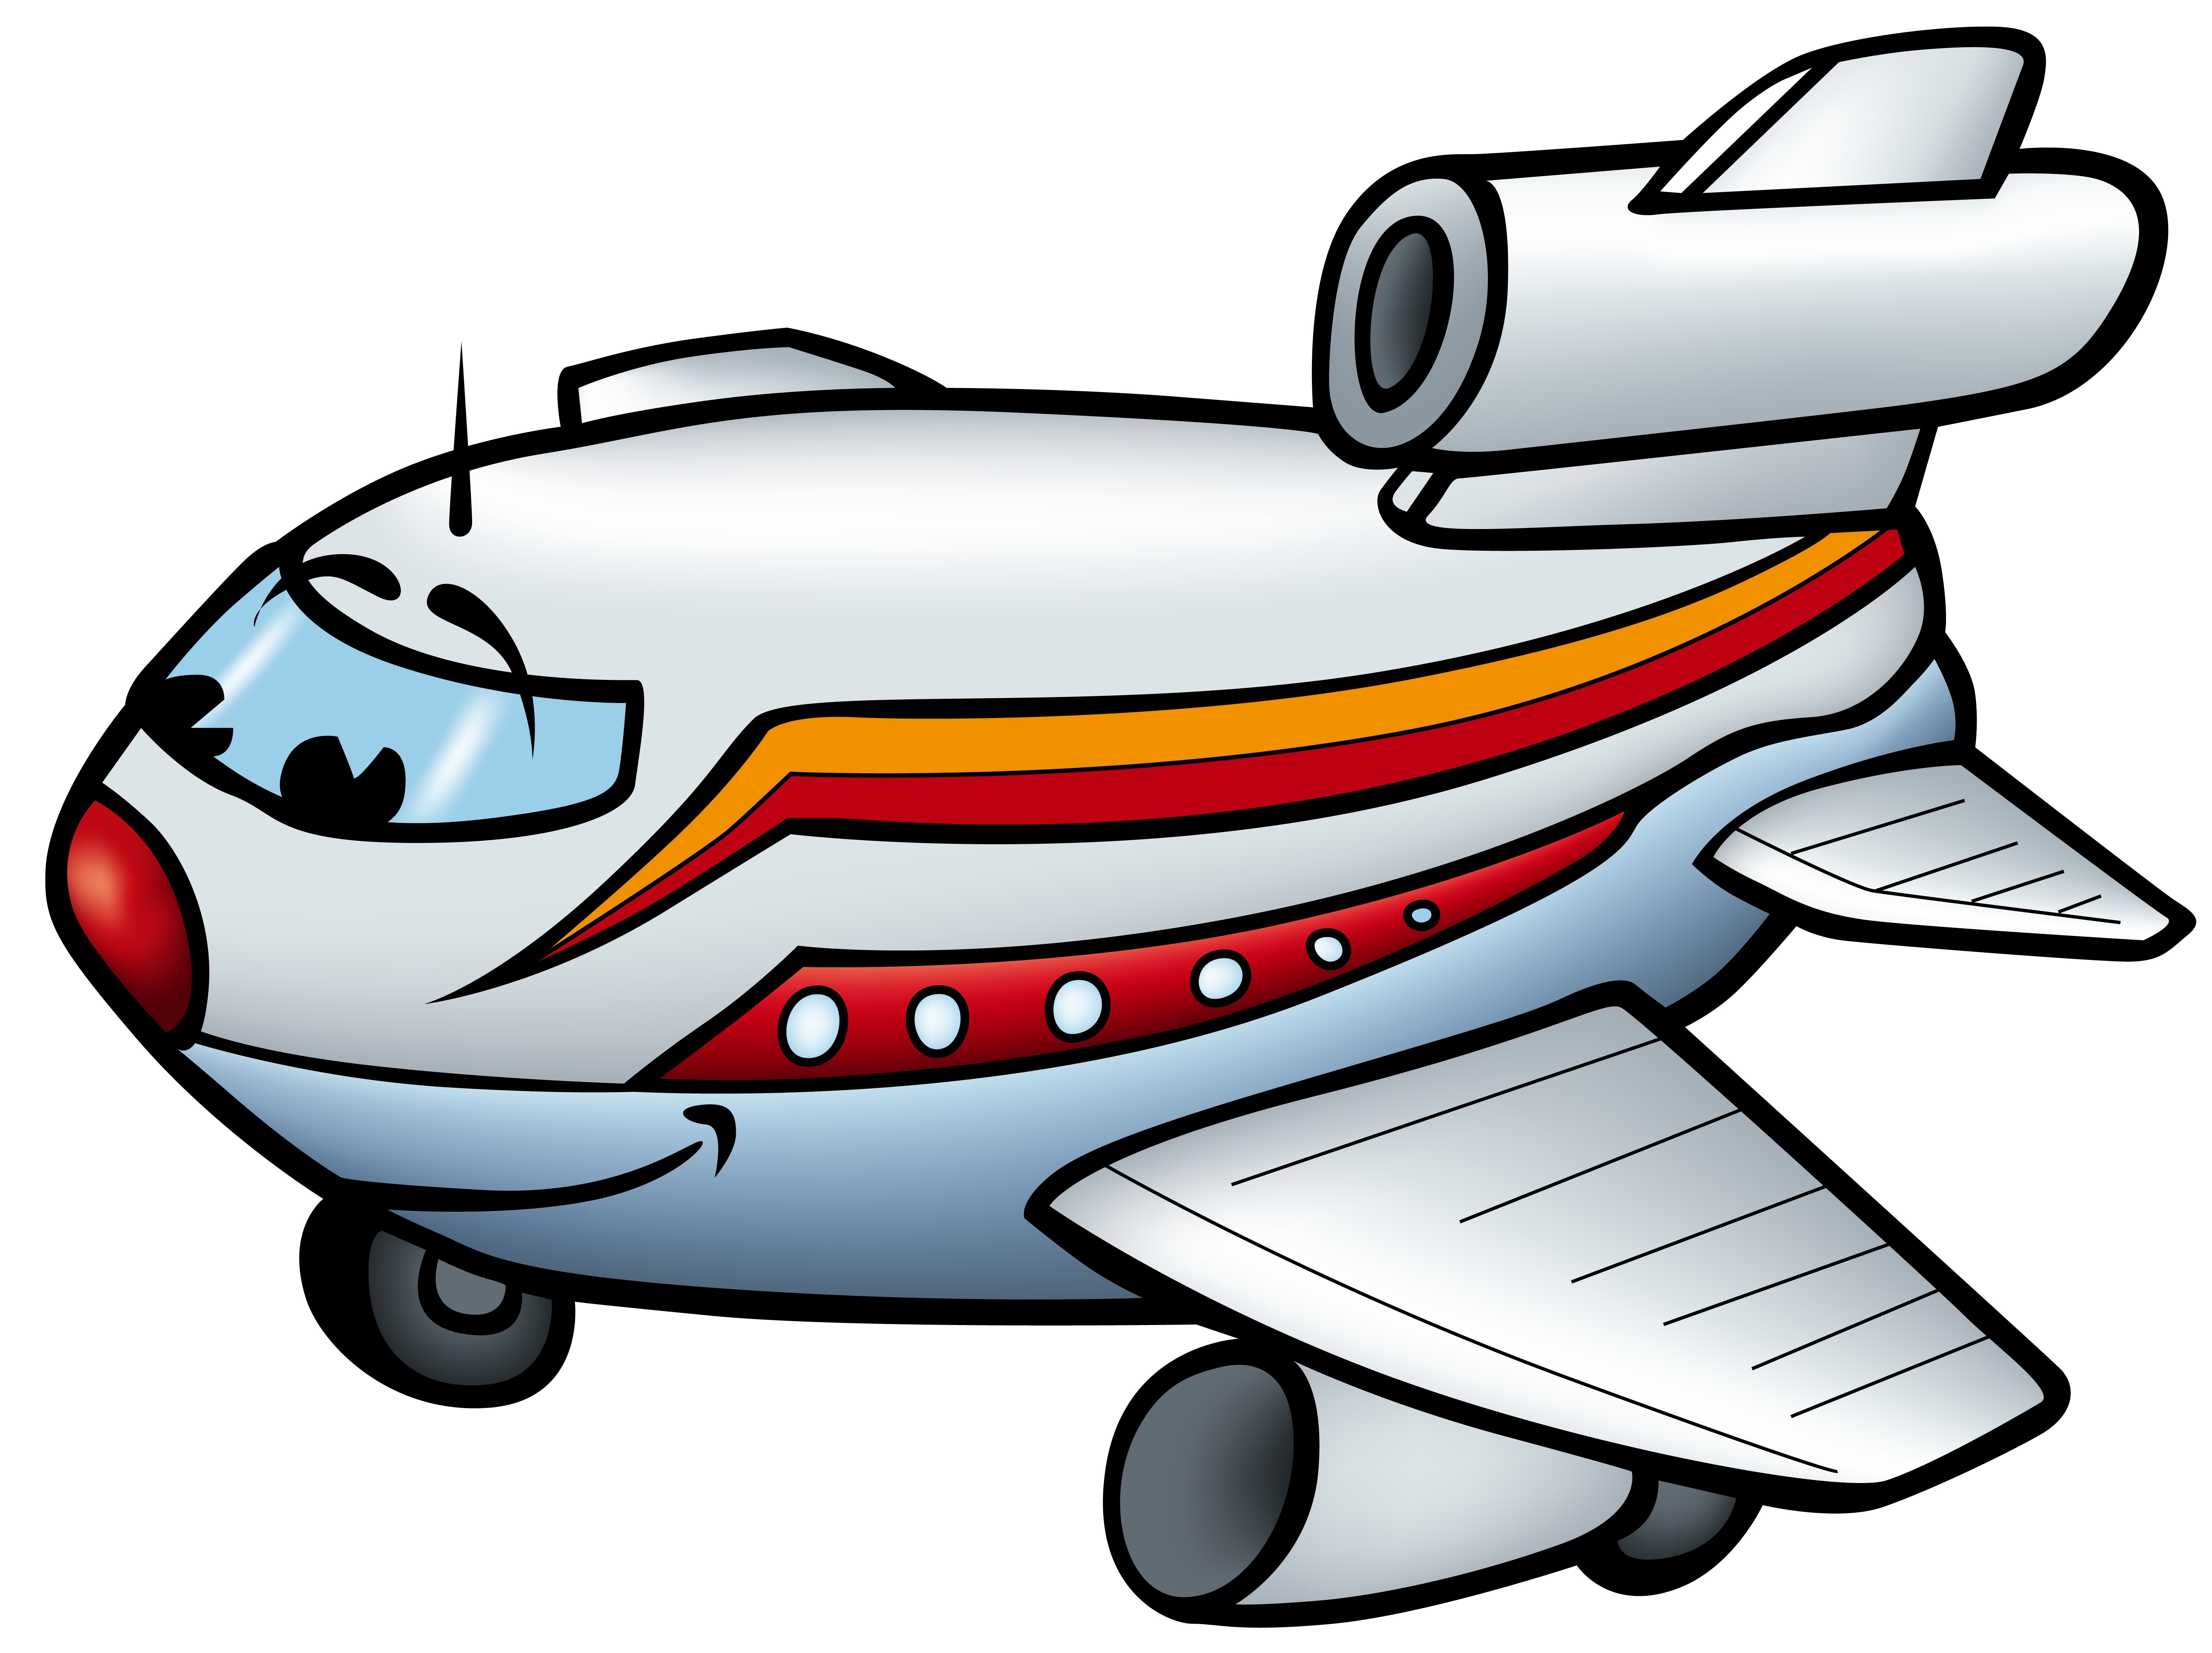 free download clipart aircraft - photo #47